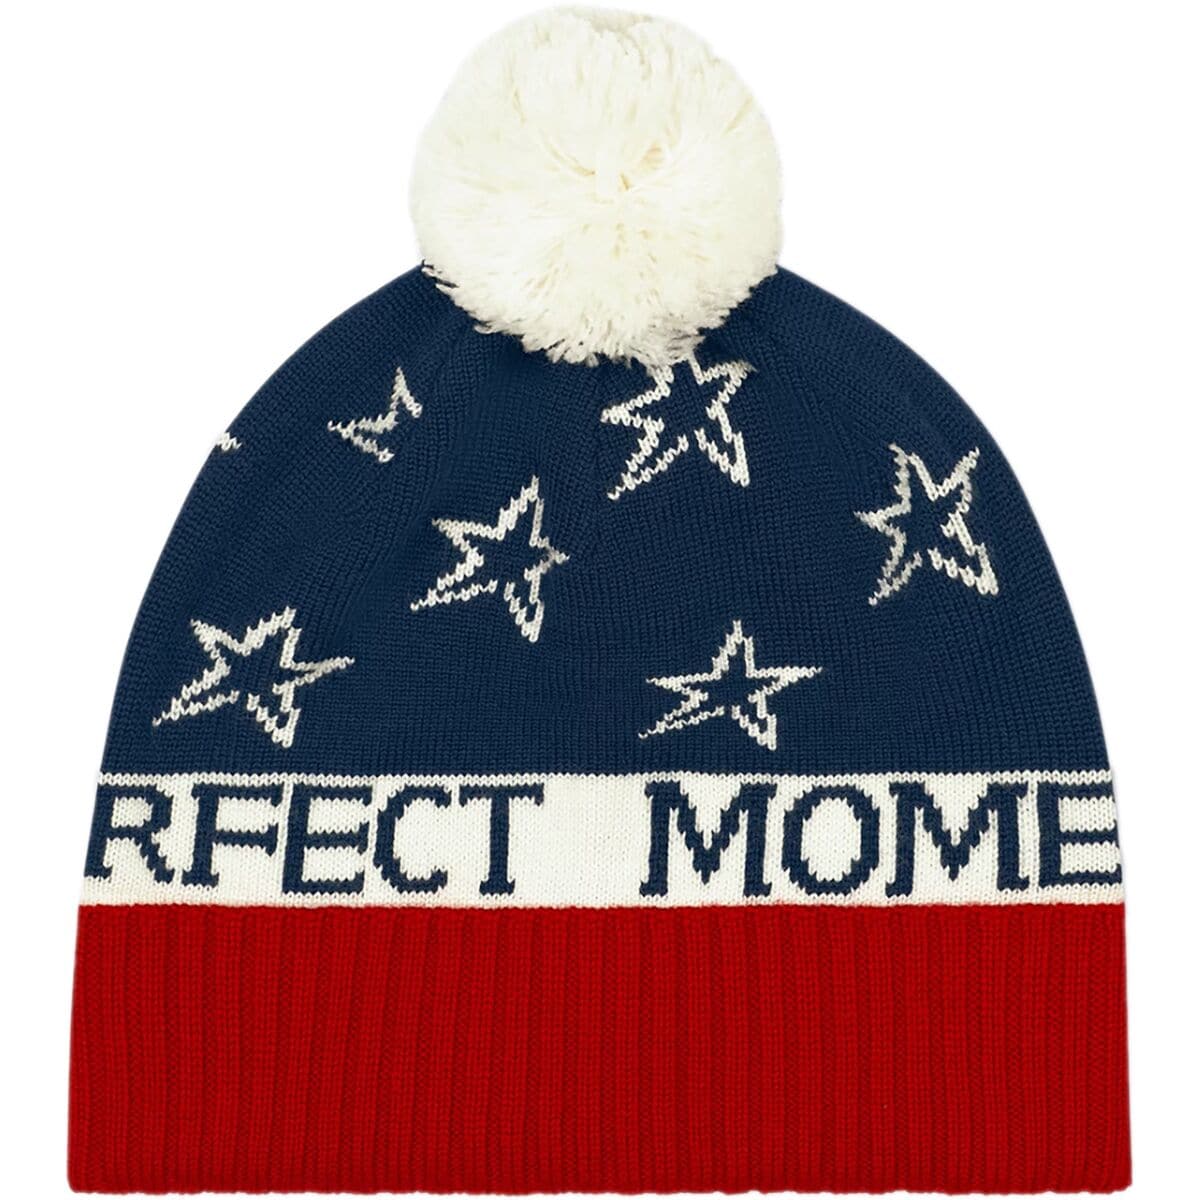 Perfect Moment PM Star Beanie - Accessories